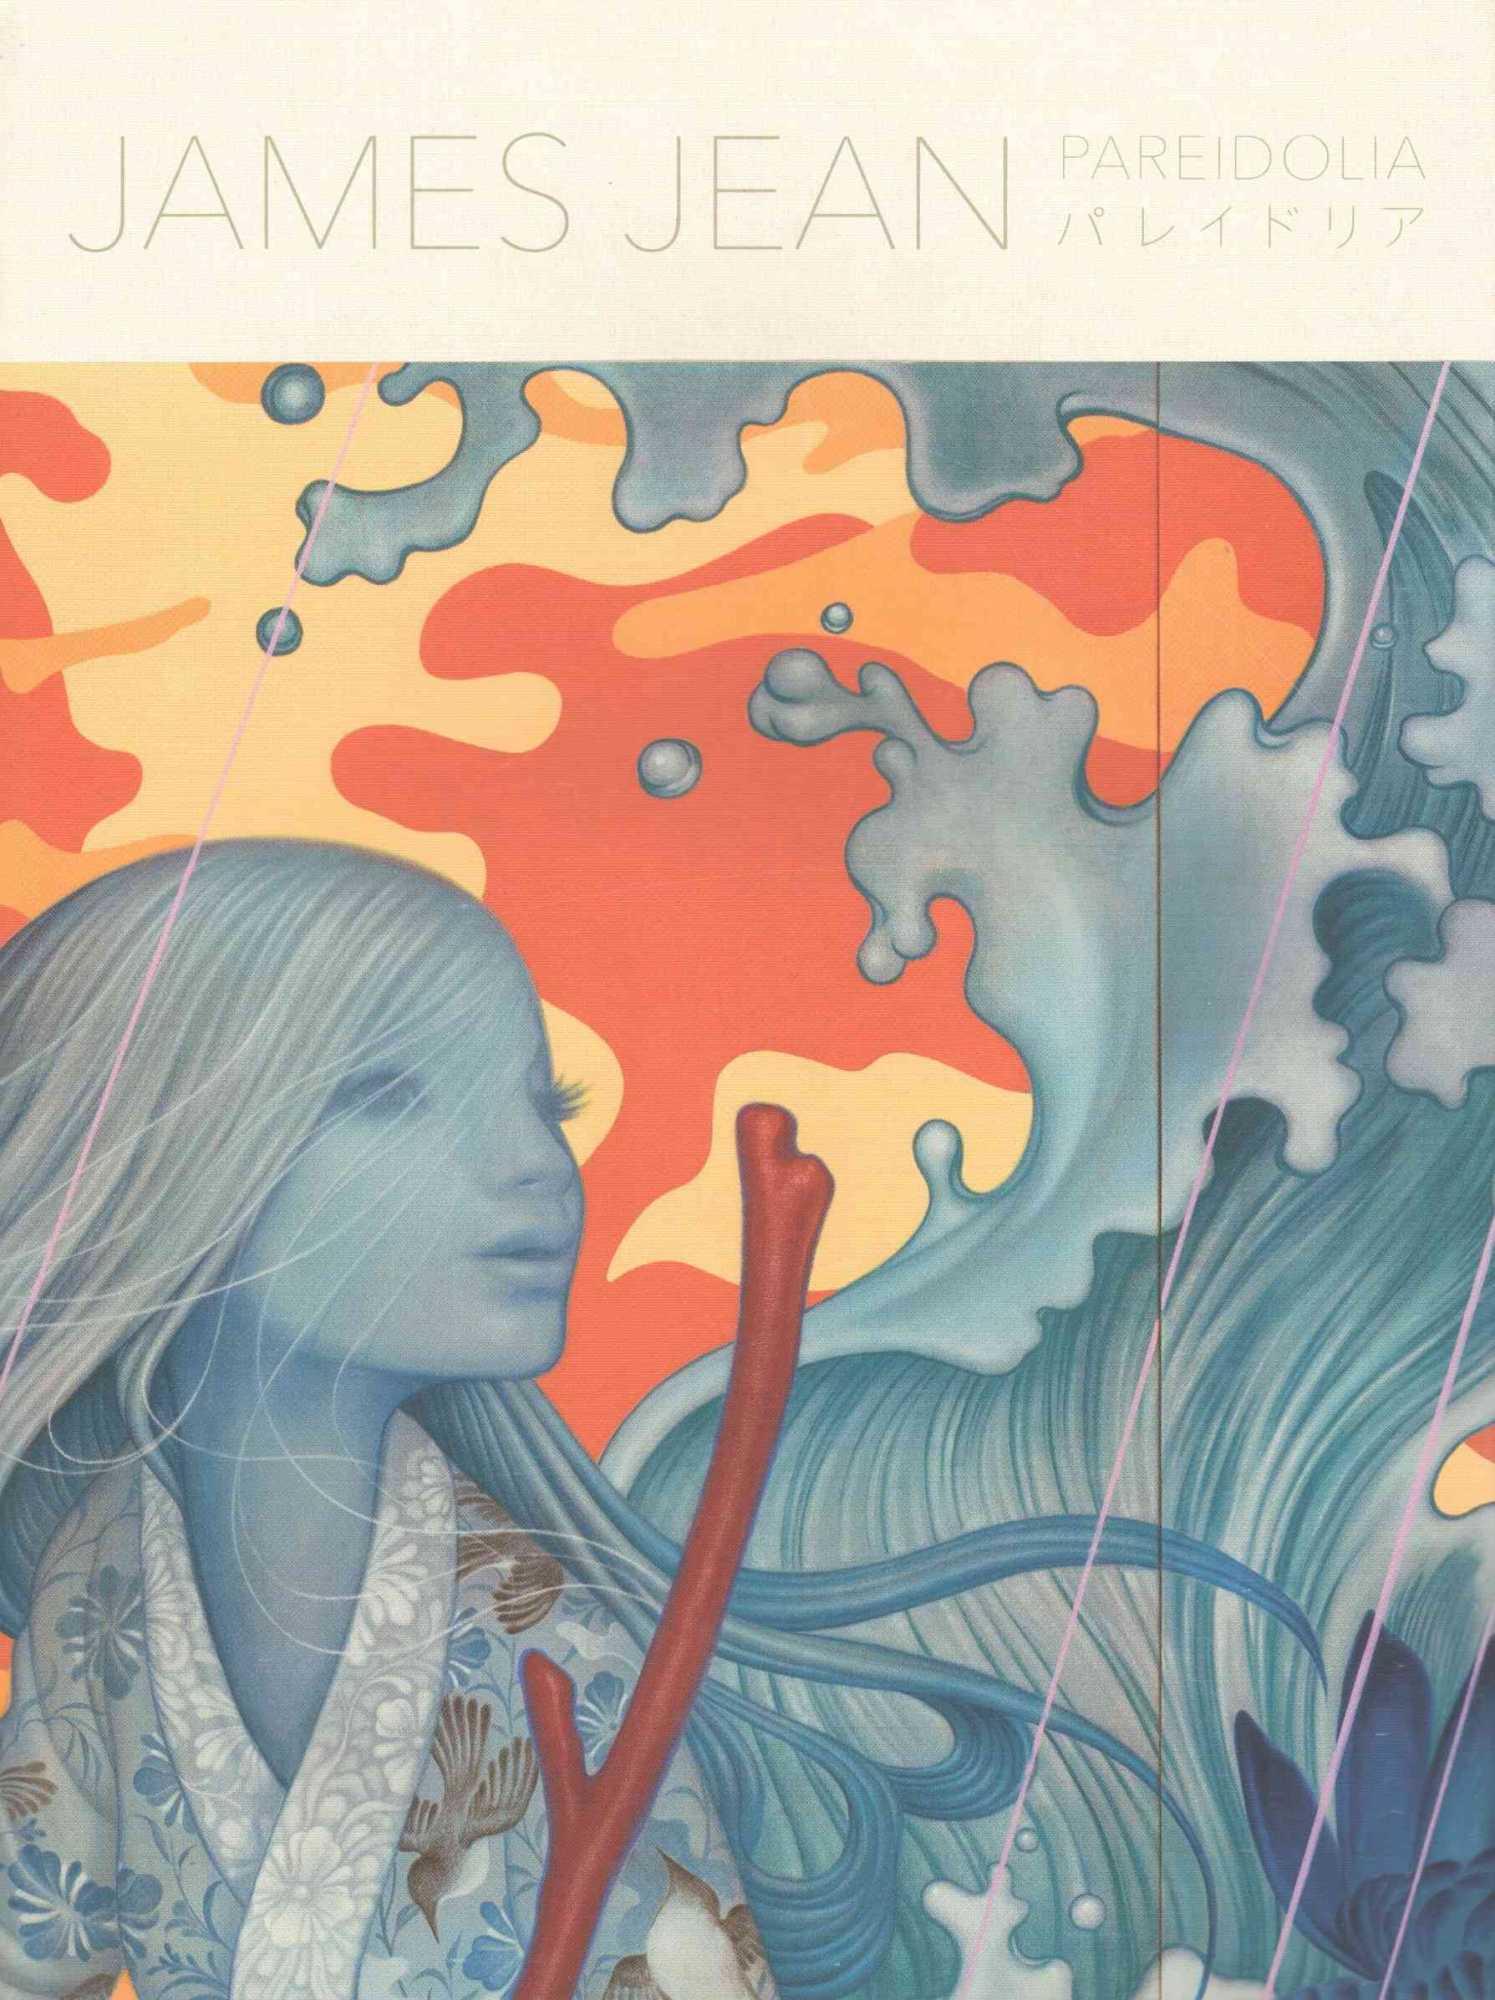 James Jean - Pareidolia: A Retrospective of Beloved and New Works by James Jean